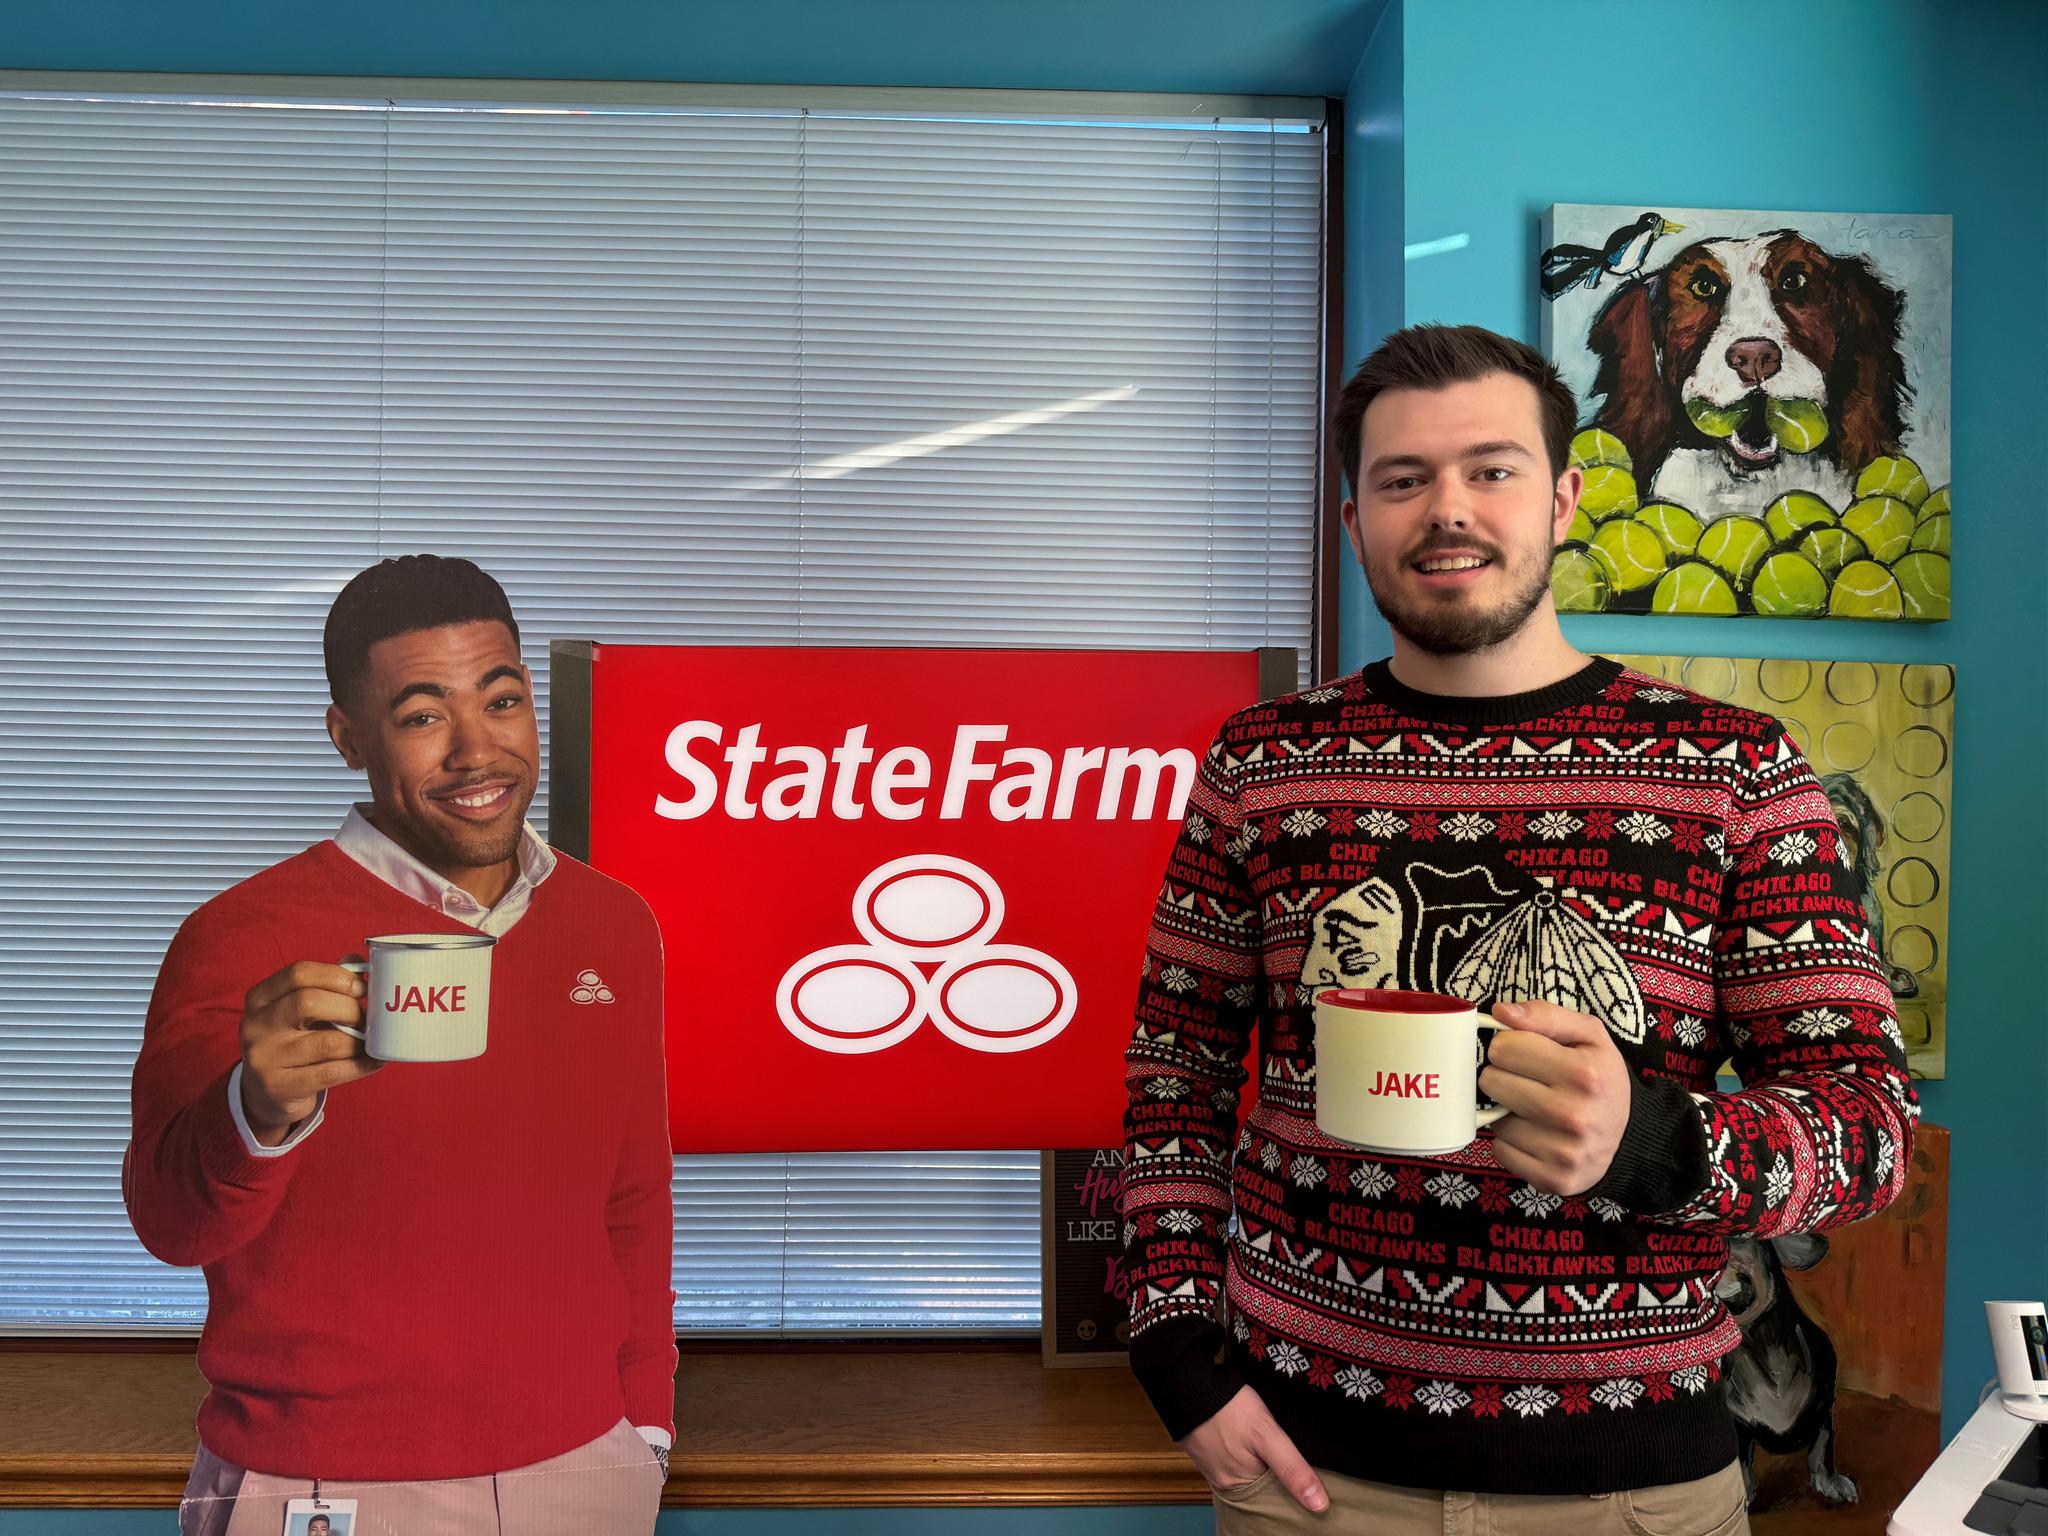 Sharing some Hot Cocoa with Jake today for National Hot Cocoa Day!
Enjoy a mug yourself today with your State Farm family!
Christmas is a time to reflect on the year, review your policies, and think about the gift of life insurance for loved ones